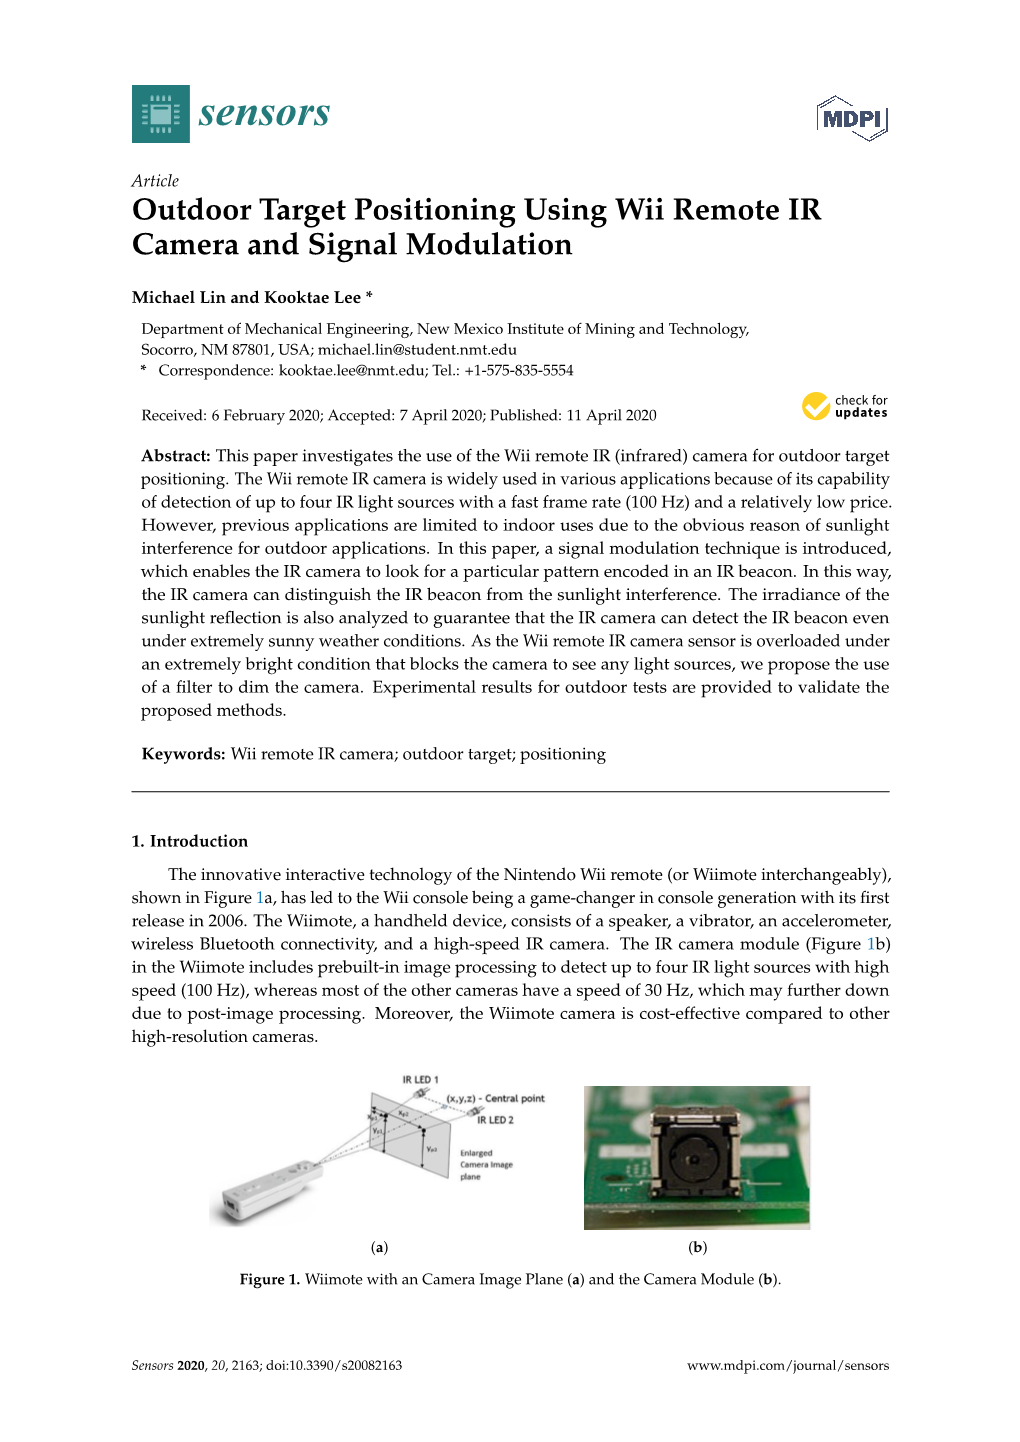 Outdoor Target Positioning Using Wii Remote IR Camera and Signal Modulation